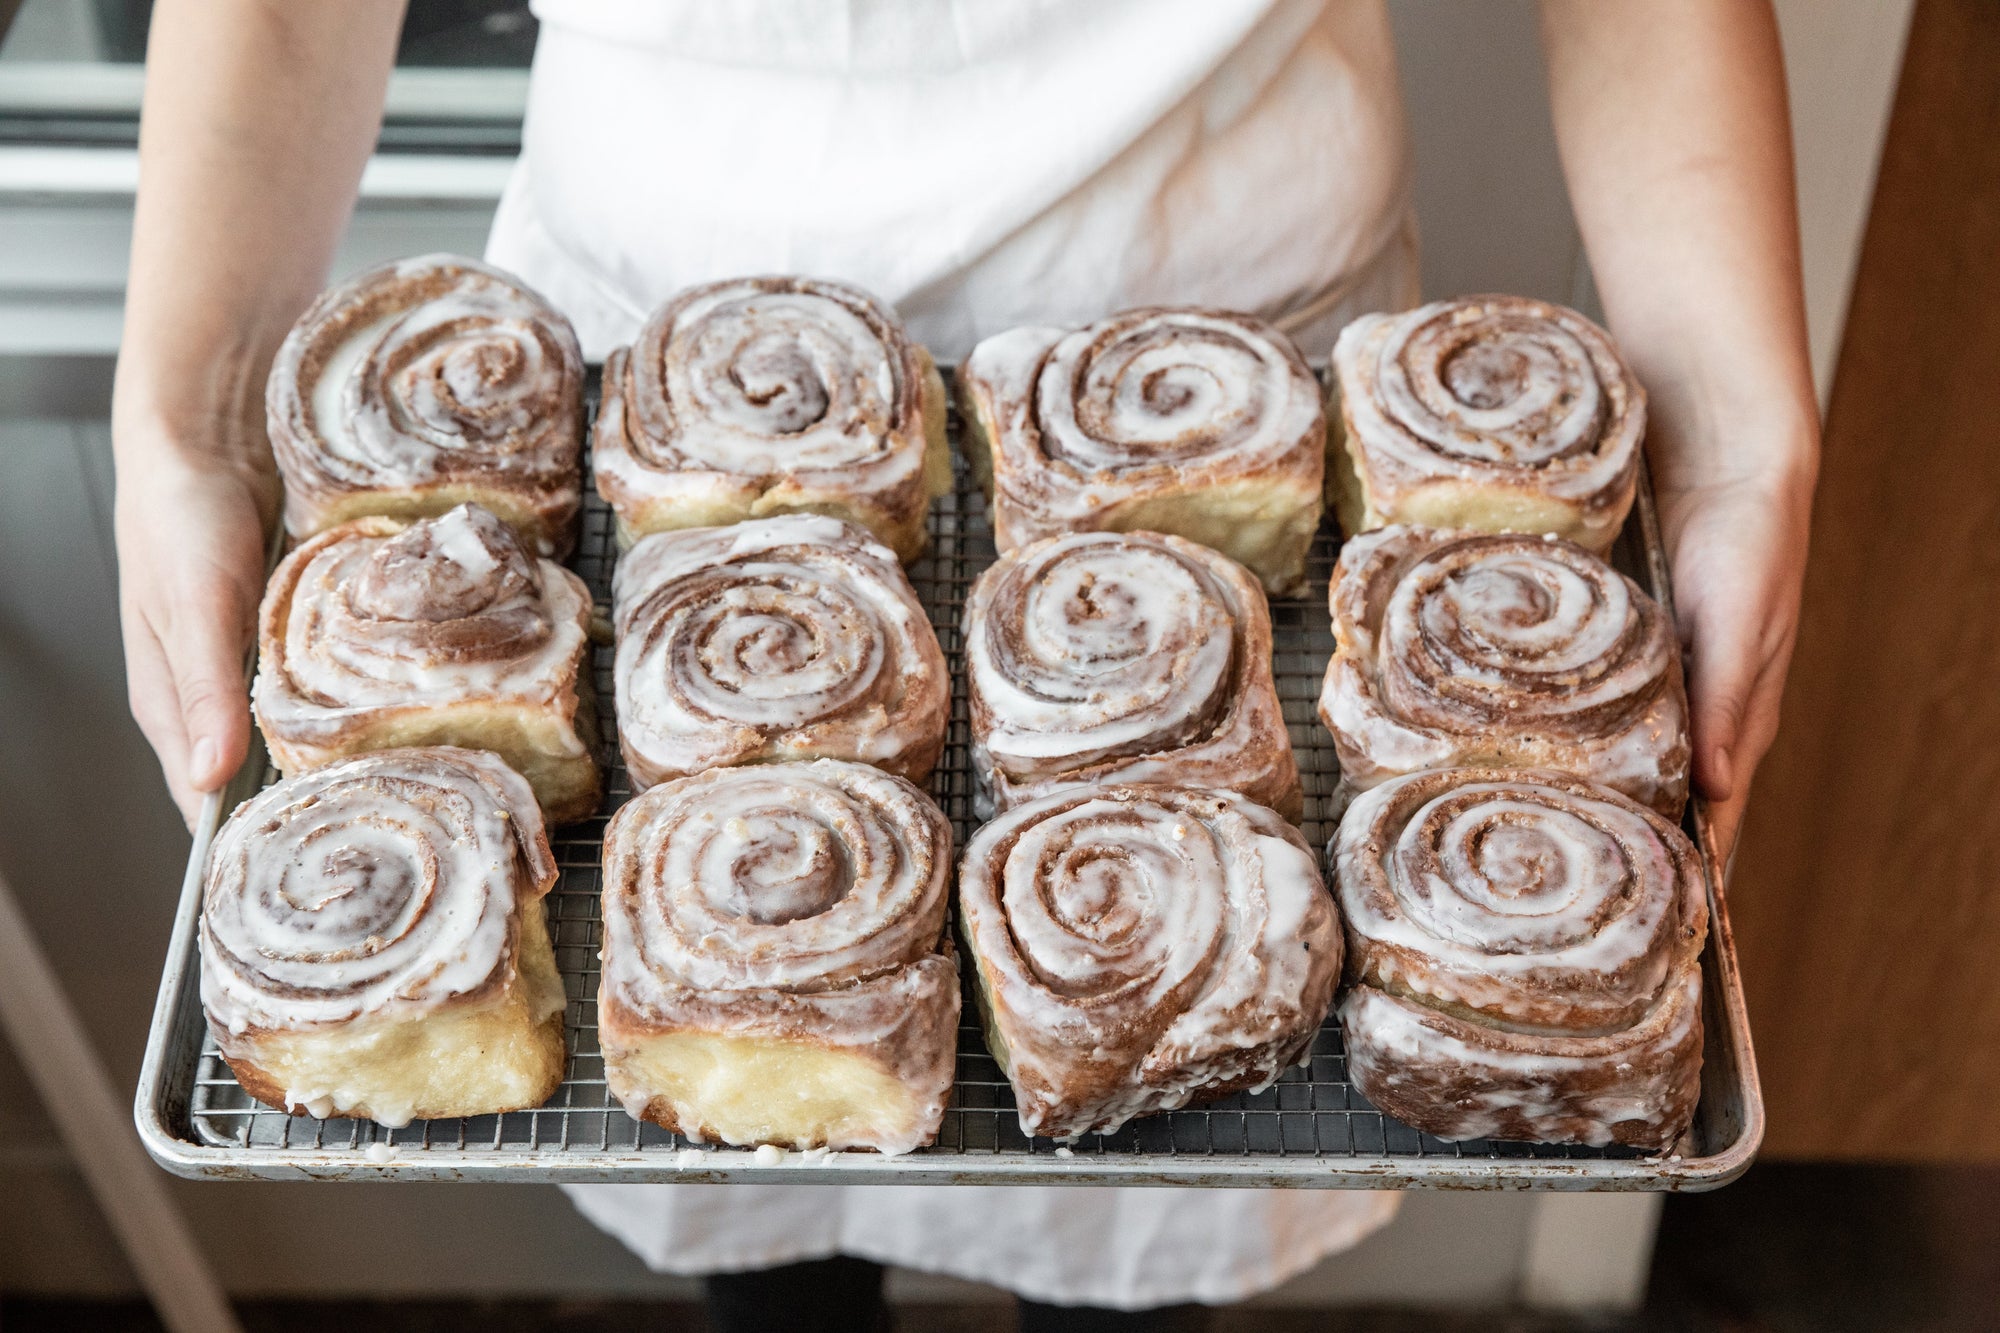 A person in a white apron holds a tray of freshly baked cinnamon rolls, each swirled with icing, displayed neatly within a metal baking tray.